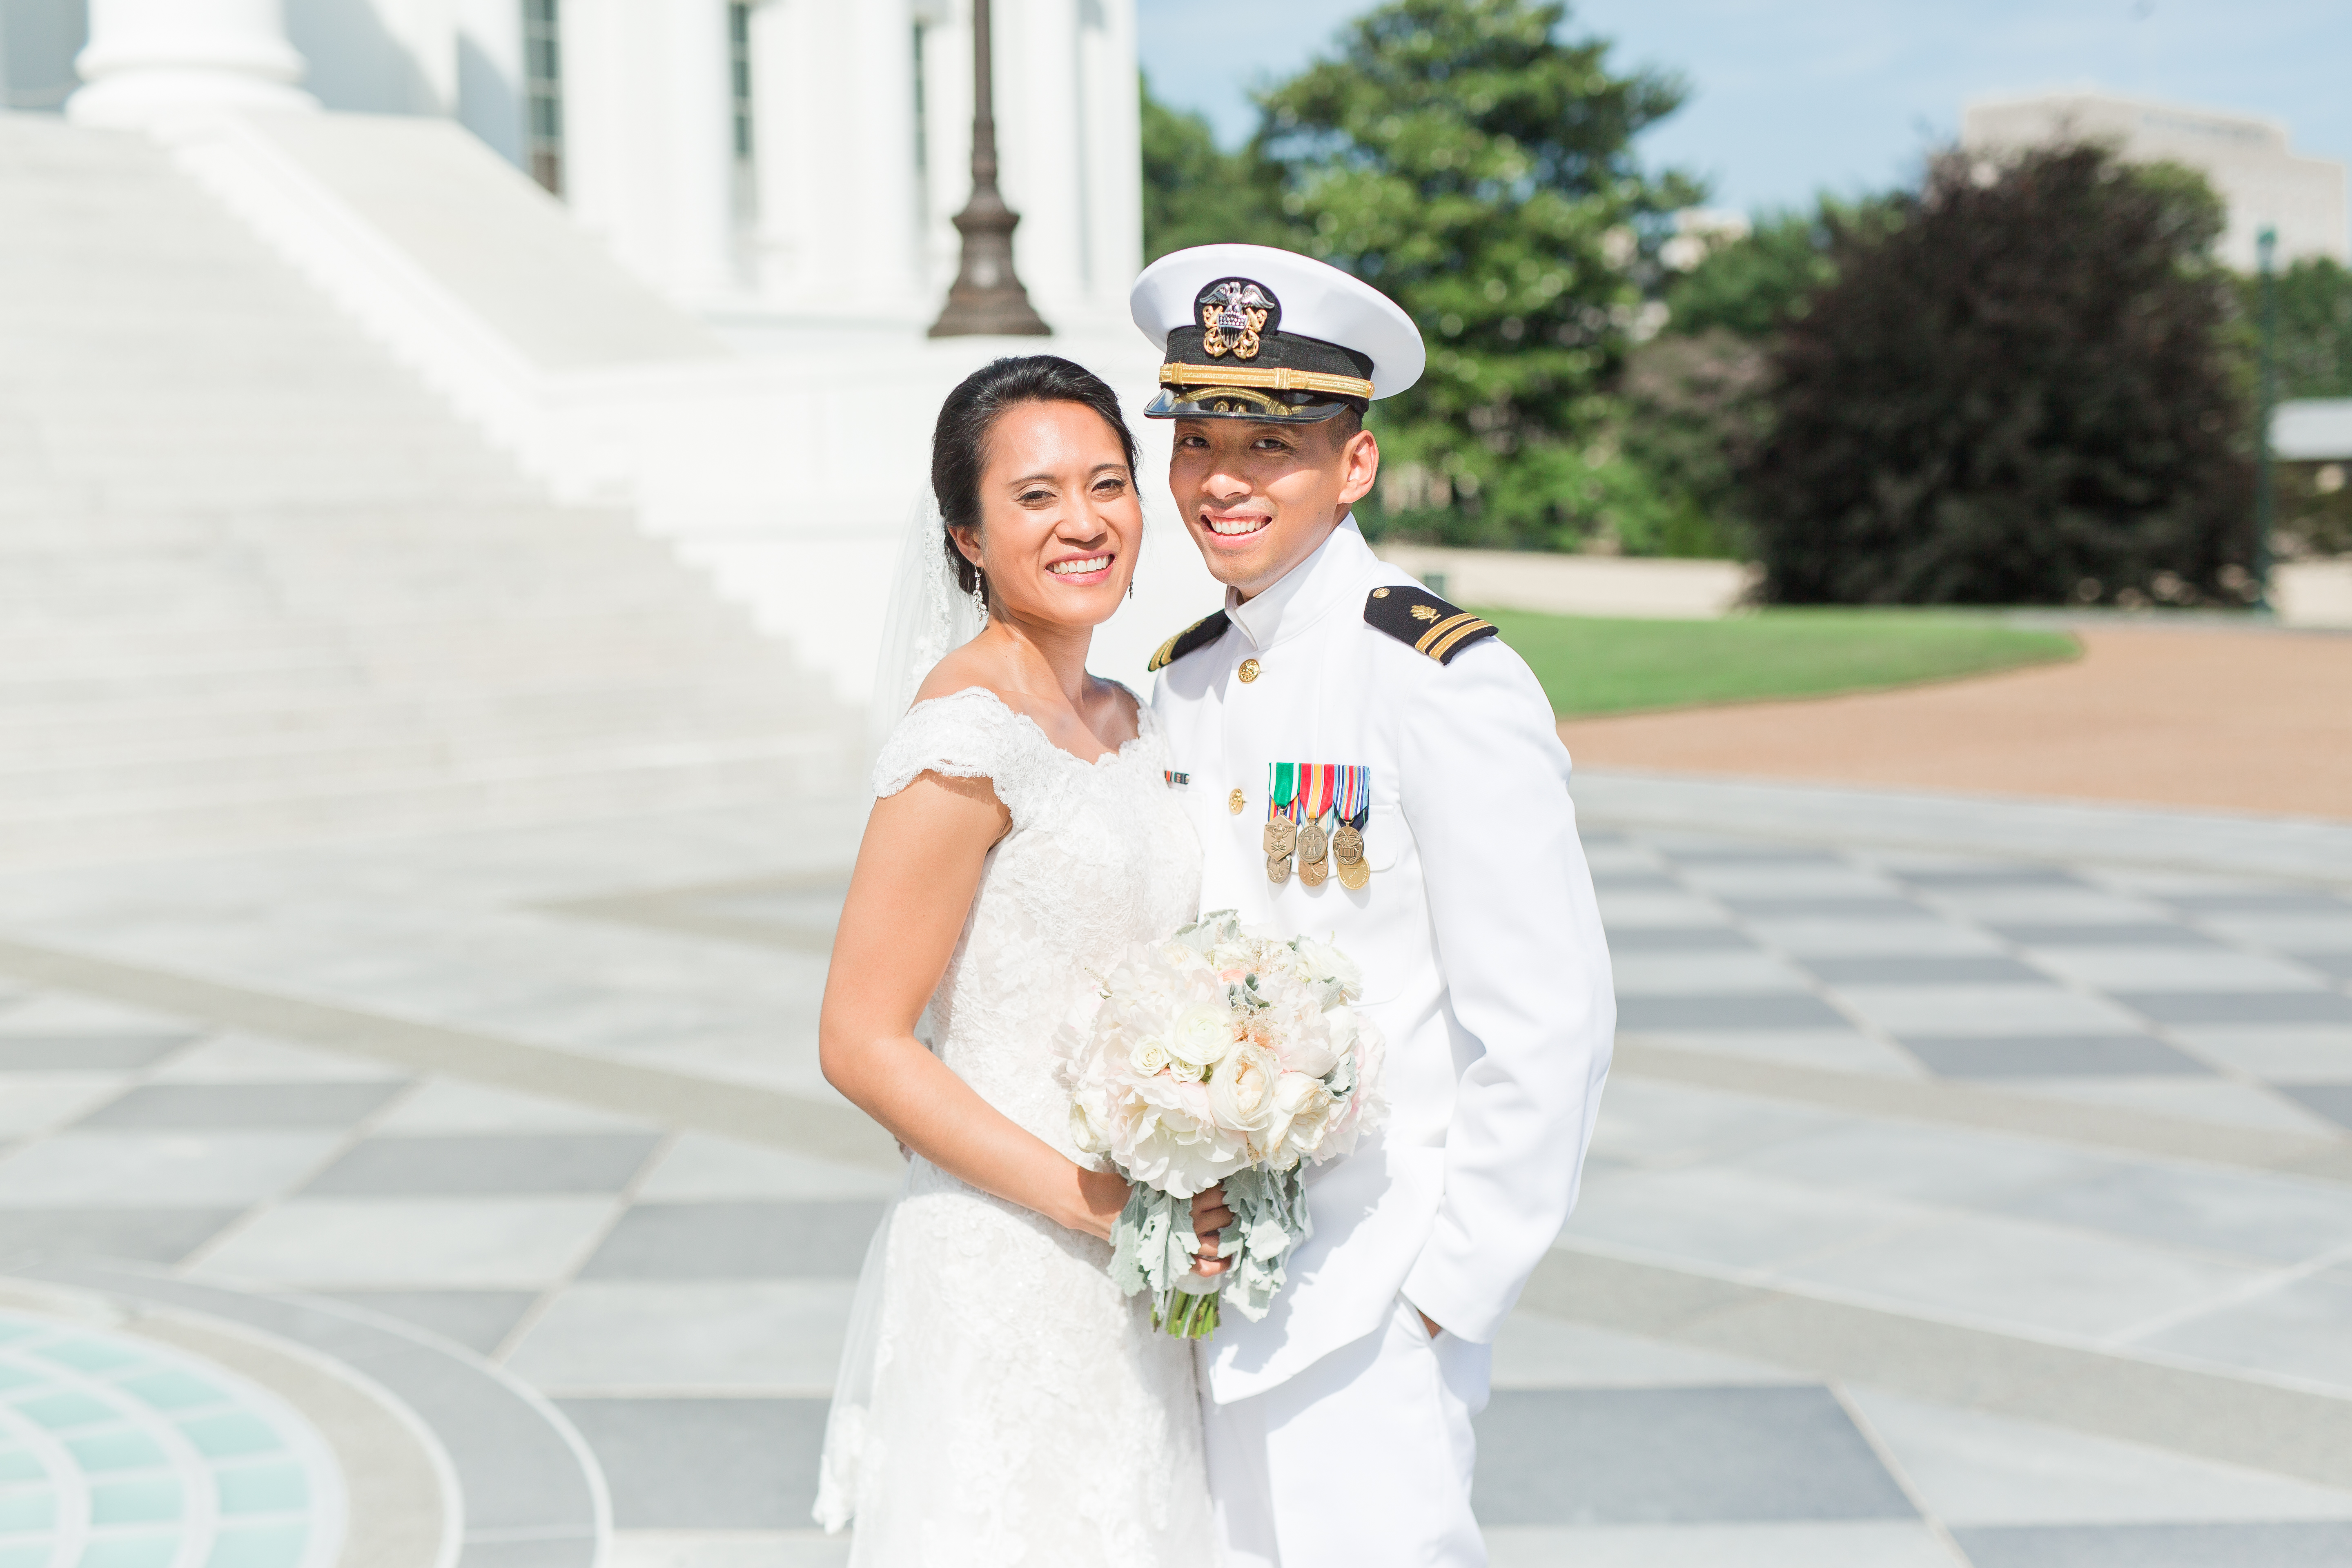 Bride and groom arm in arm at the virginia state capitla